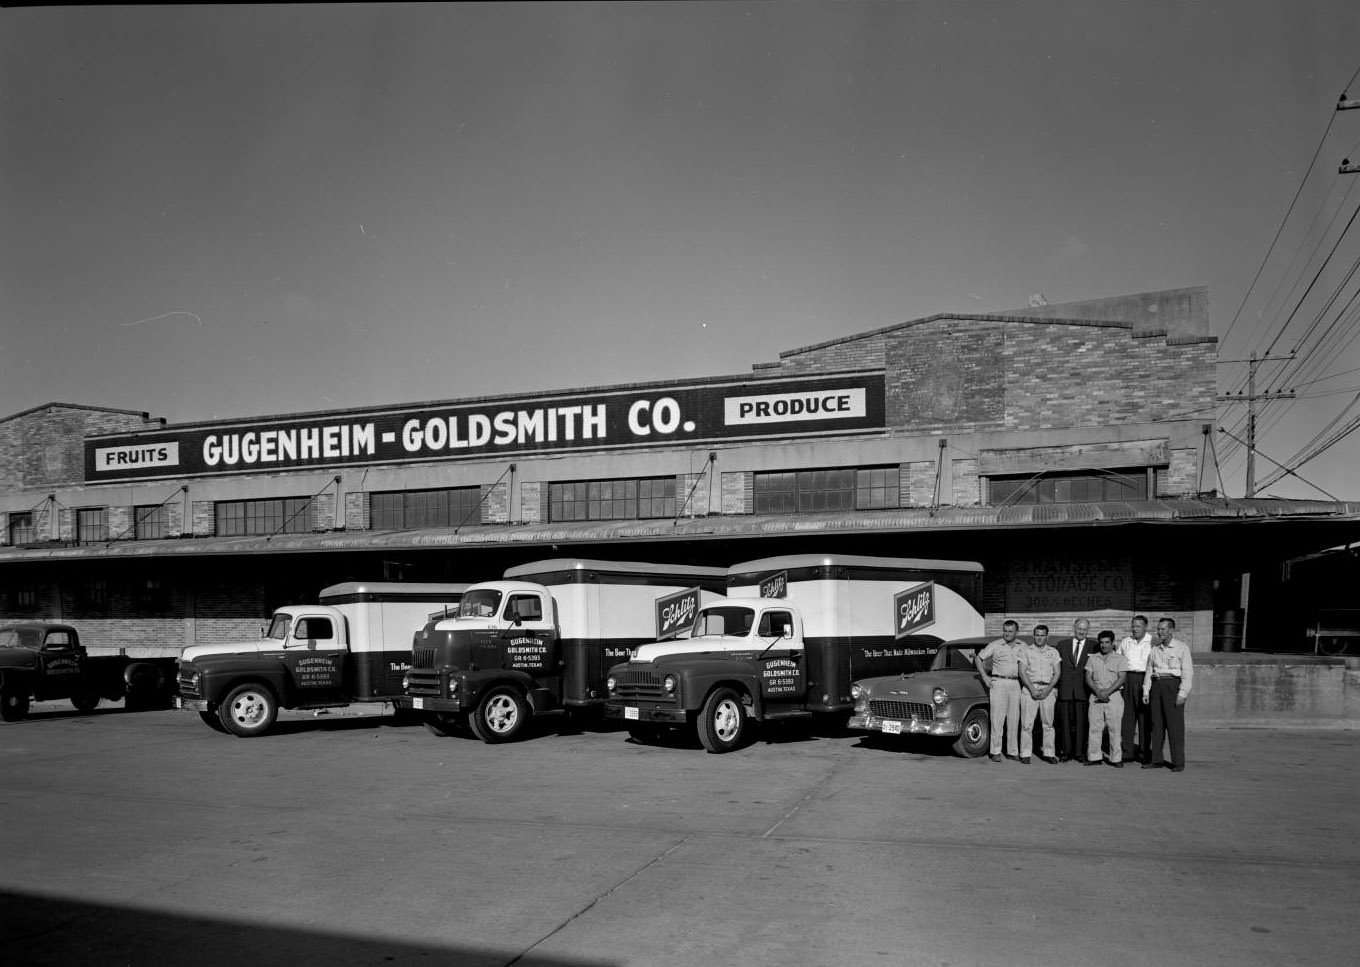 Exterior of Gugenheim-Goldsmith Produce Company with Trucks, 1957.